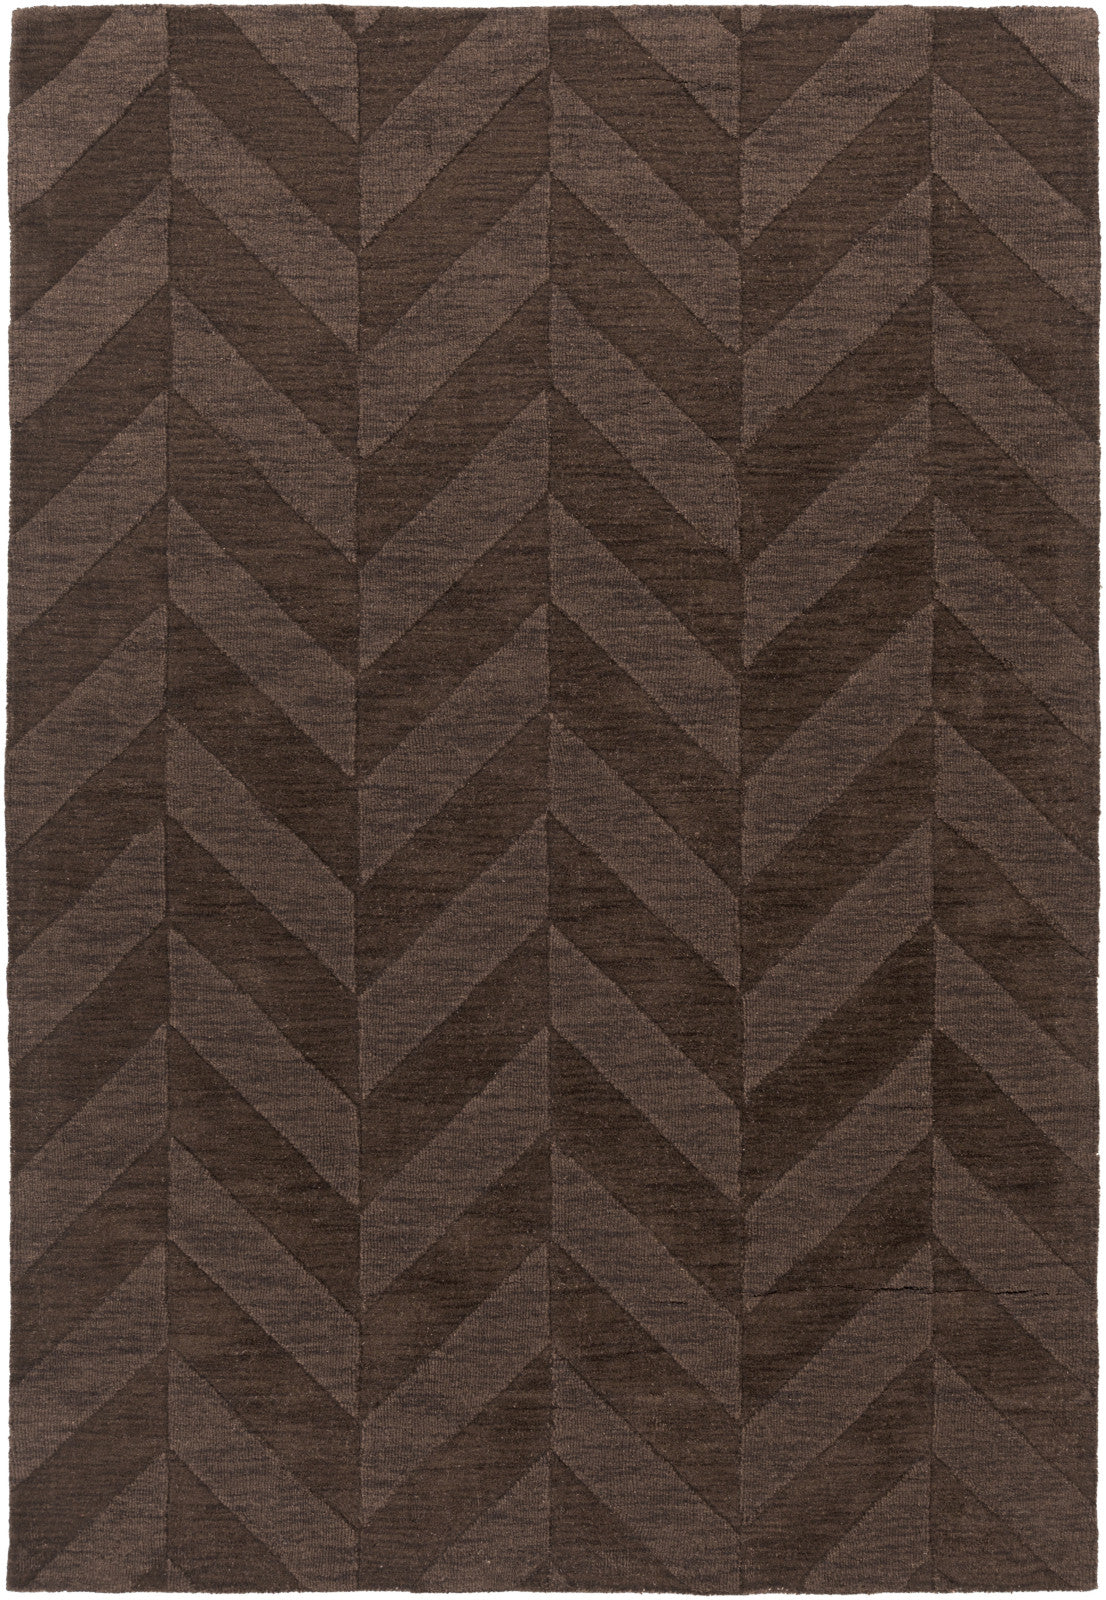 Artistic Weavers Central Park Carrie Chocolate Brown Area Rug main image